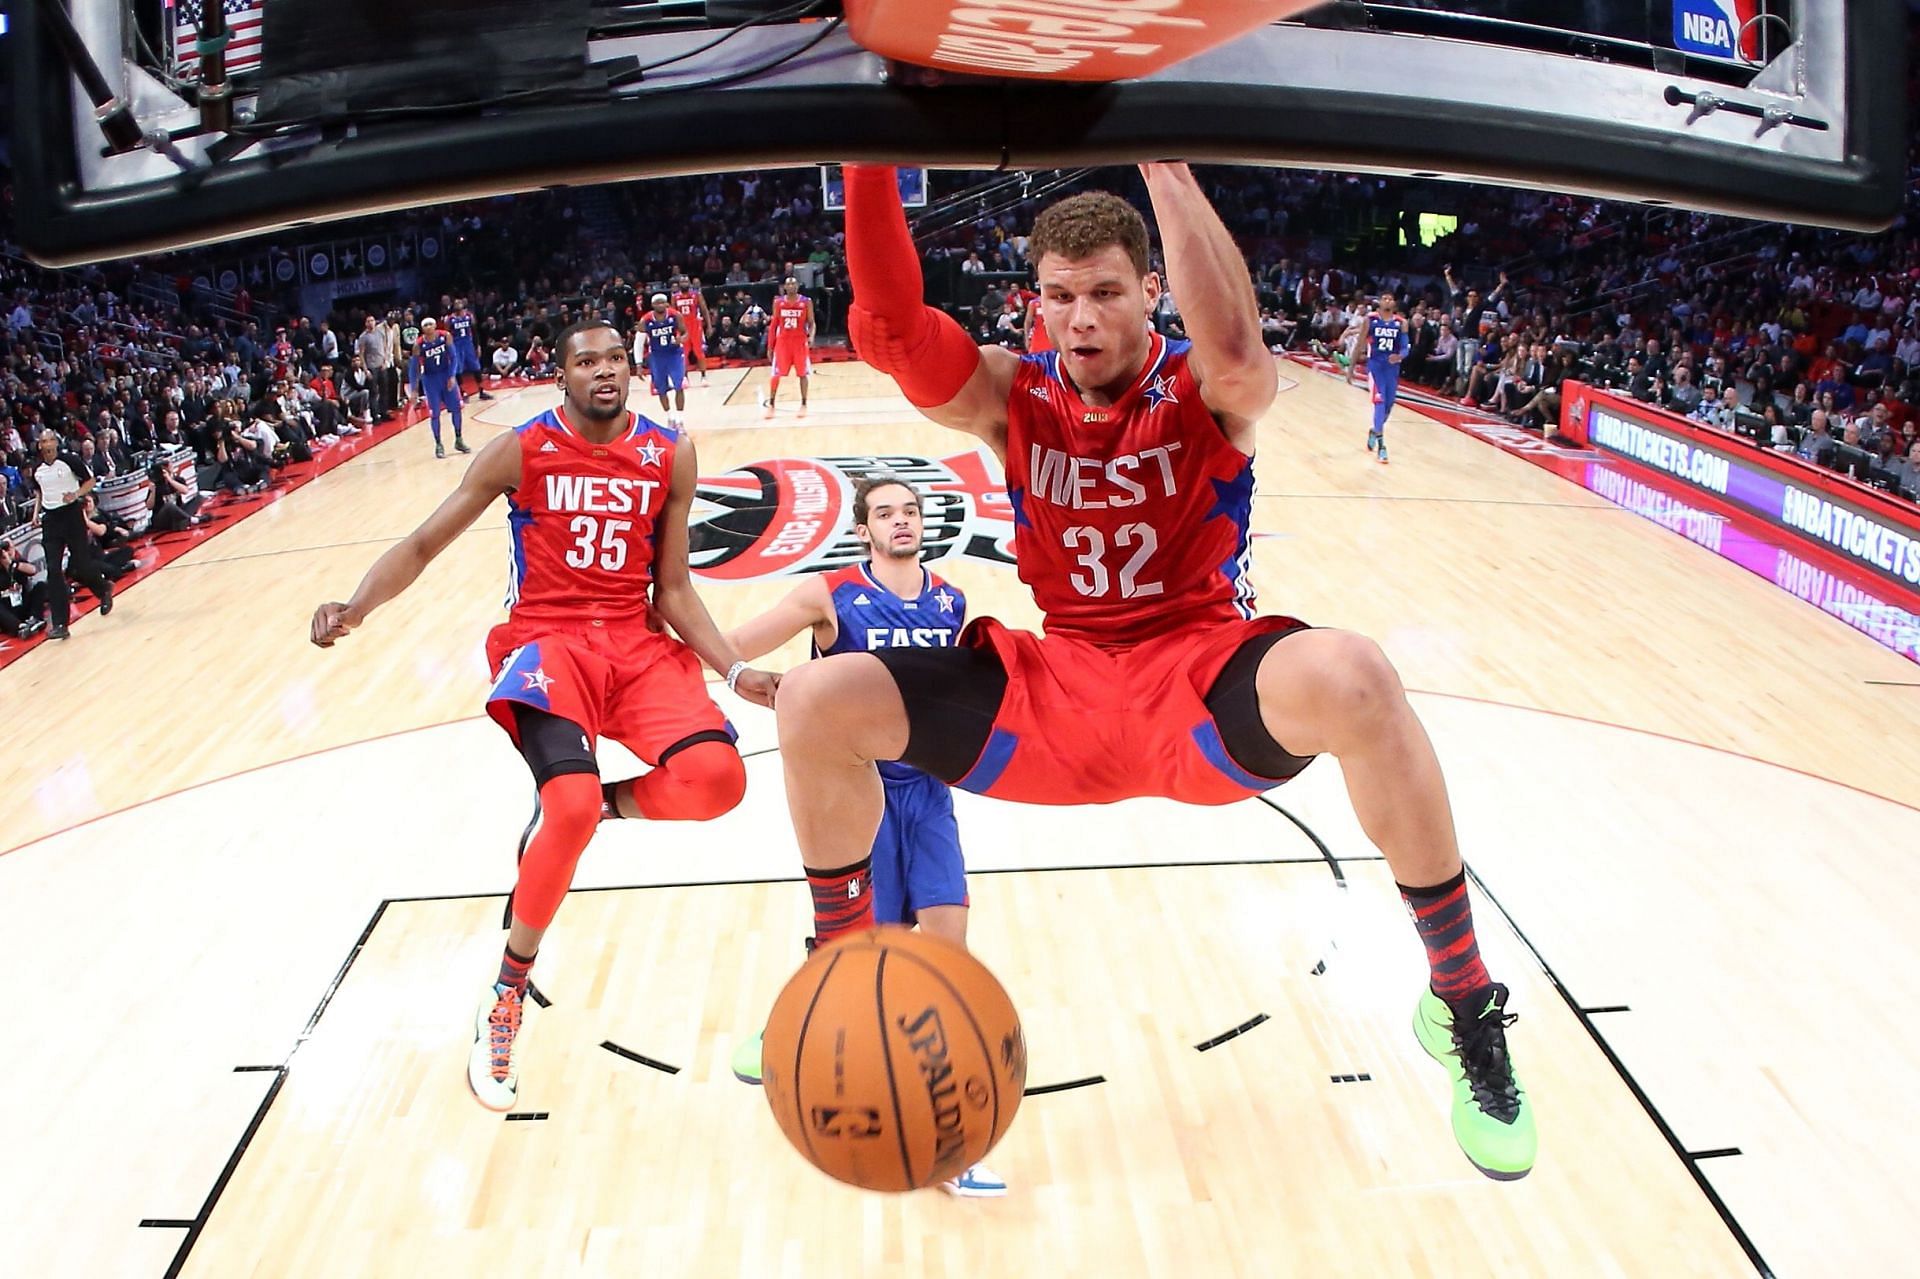 Blake Griffin at the 2013 NBA All-Star Game